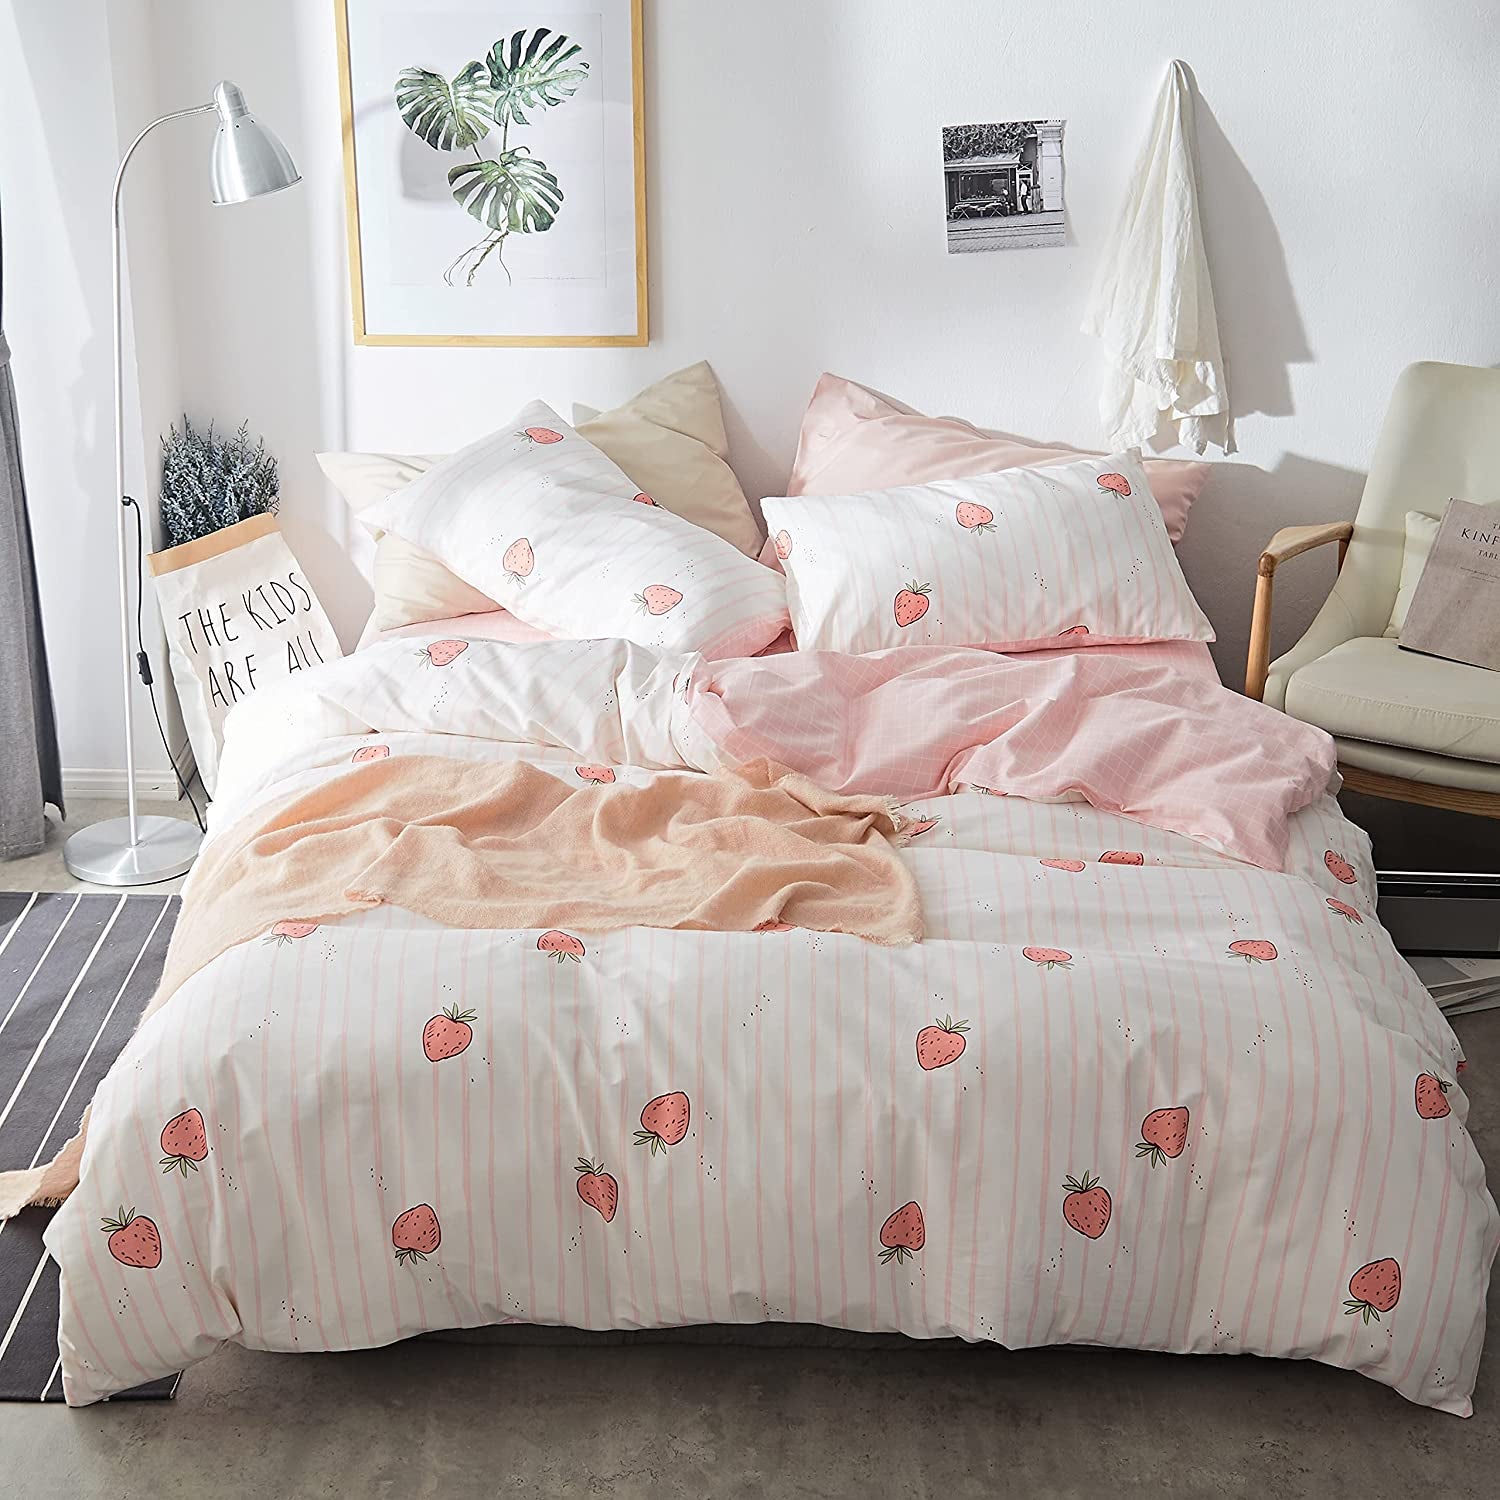 a white duvet set with light pink stripes and small red strawberry pattern